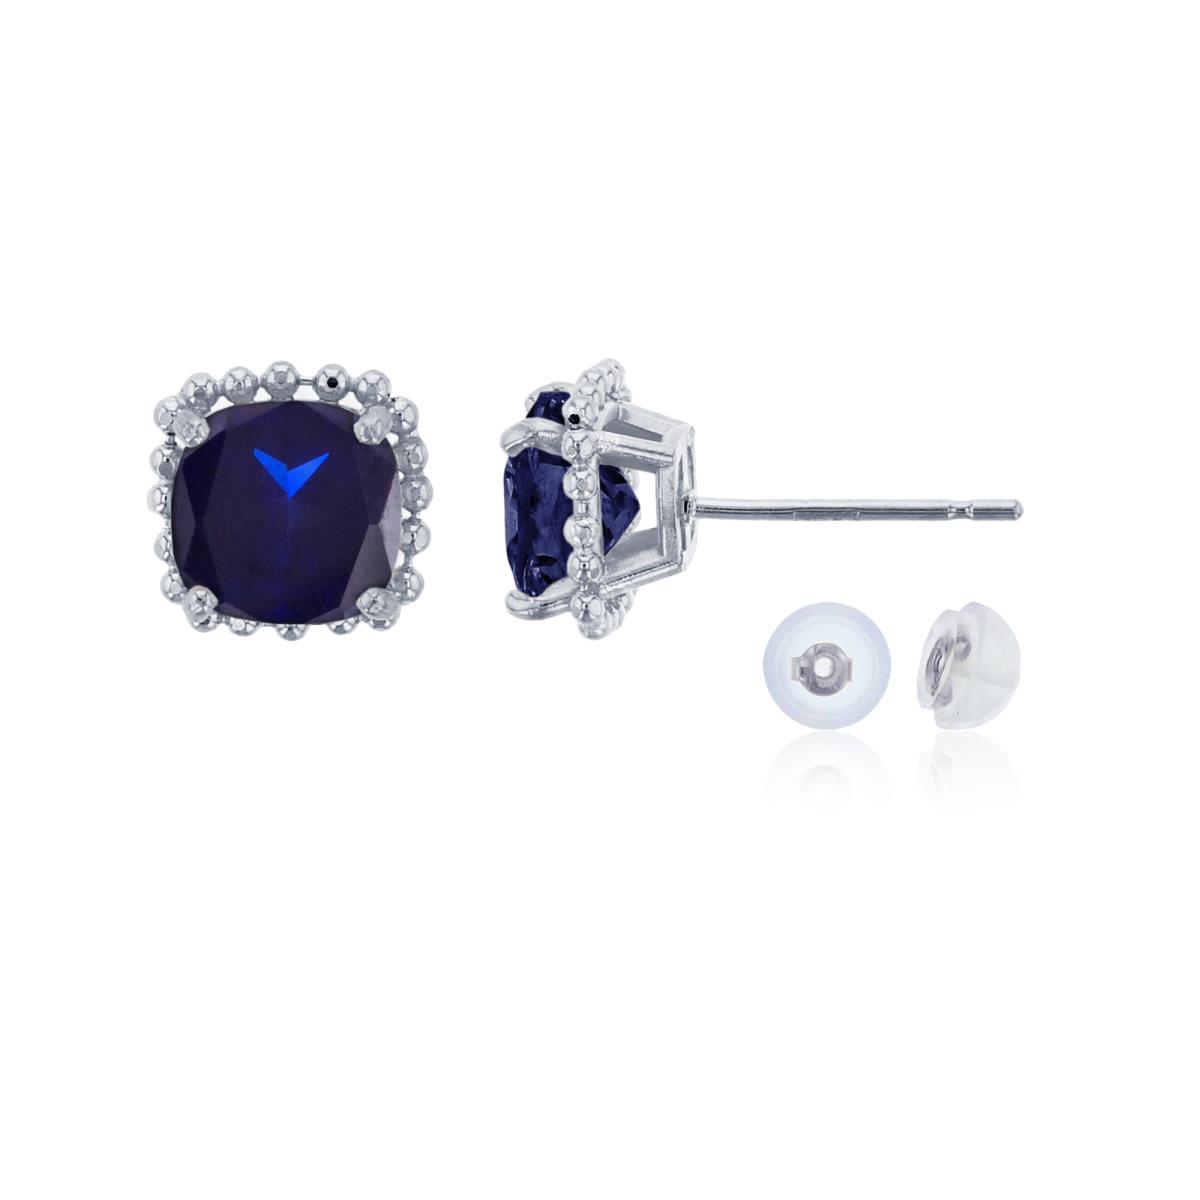 10K White Gold 6x6mm Cushion Cut Created Blue Sapphire Bead Frame Stud Earring with Silicone Back